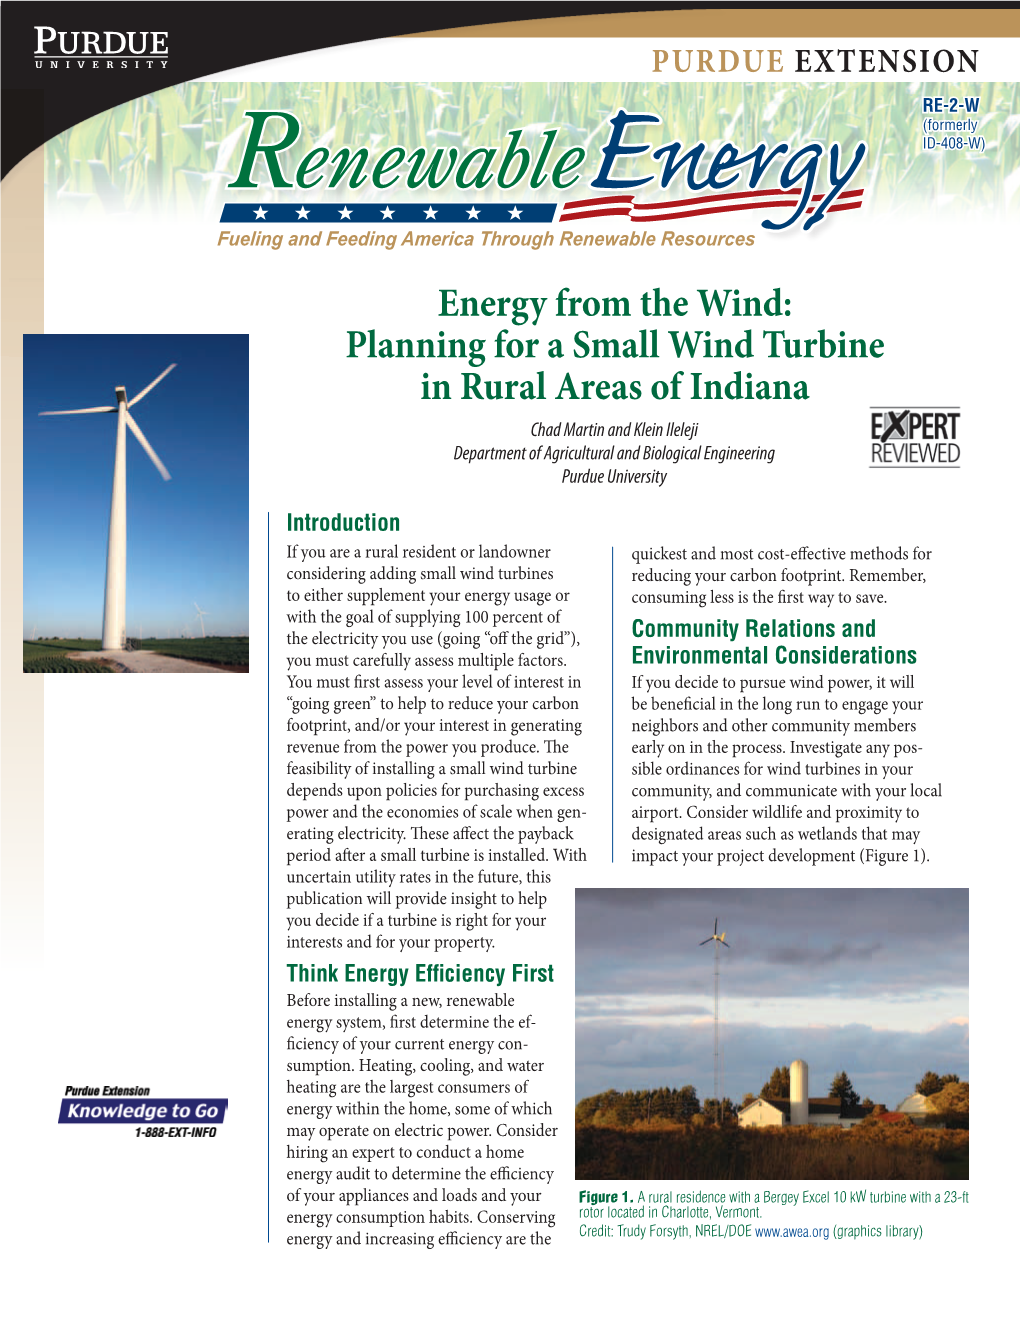 Energy from the Wind: Planning for a Small Wind Turbine in Rural Areas of Indiana